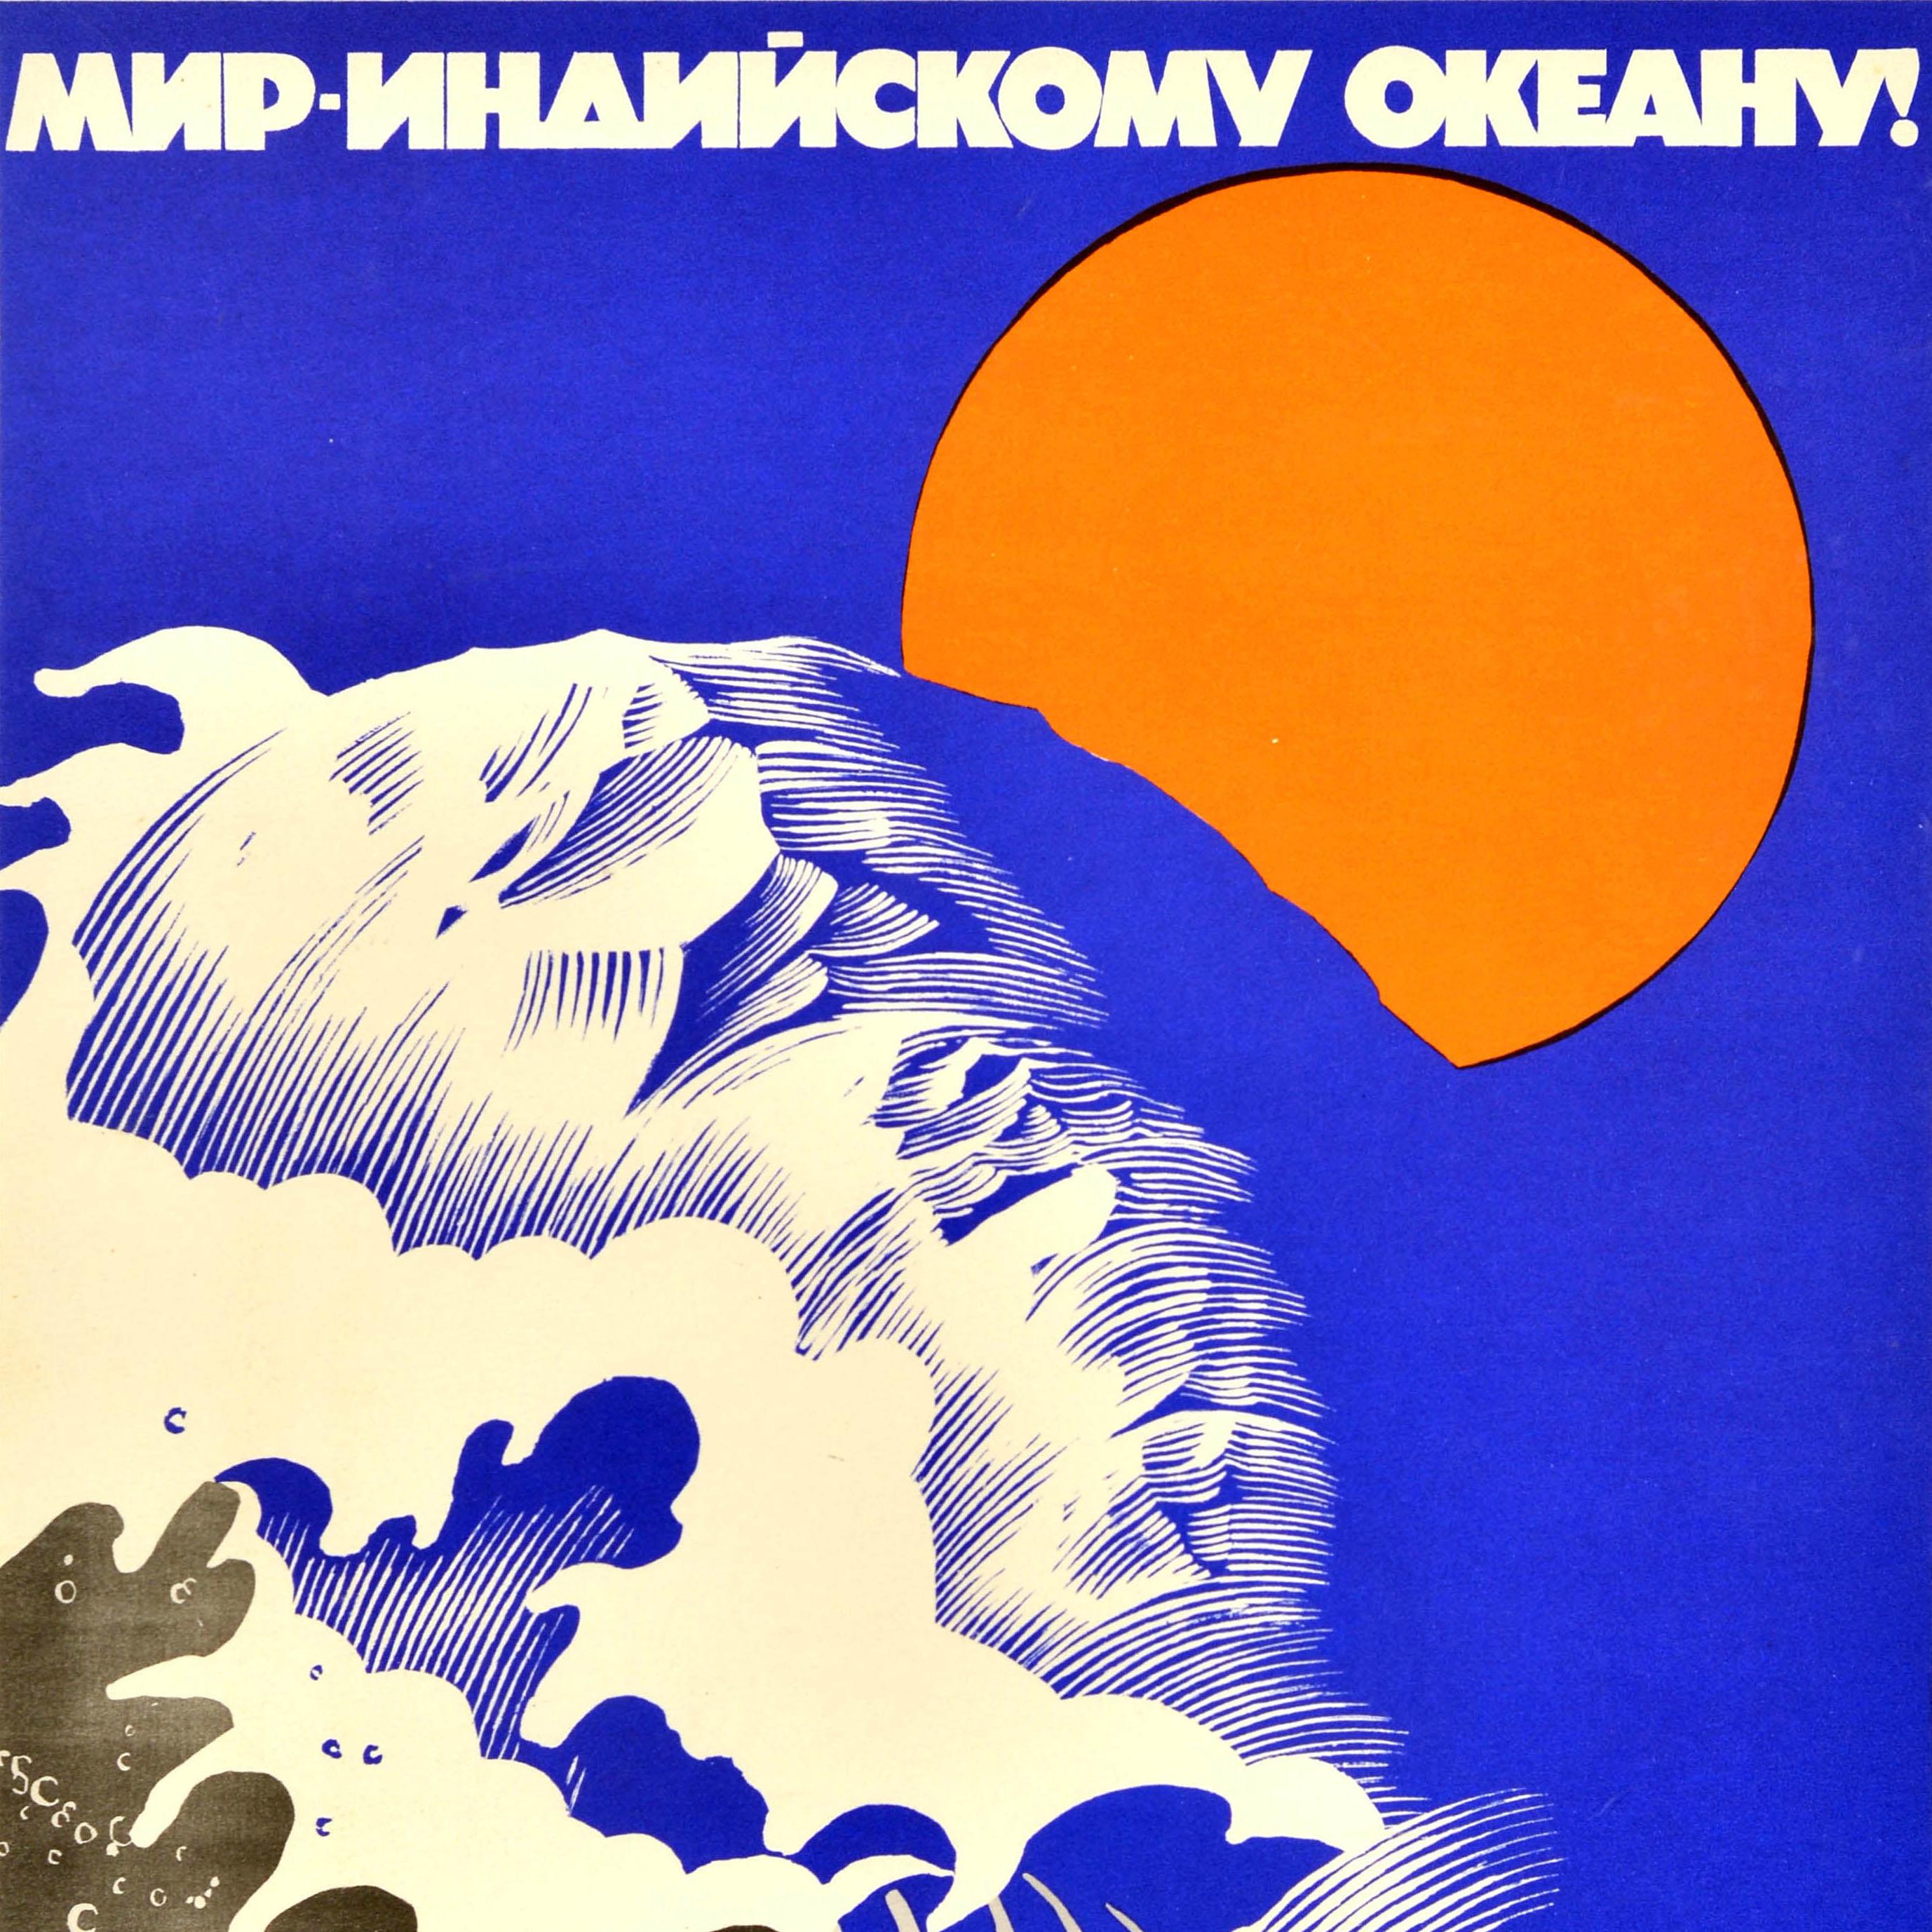 Original vintage Soviet Cold War era poster - Мир Индиискому Океану! Peace to the Indian Ocean - featuring an illustration of a large blue wave about to engulf a black and white image of US Navy ships at sea in the corner, an orange sun on the blue